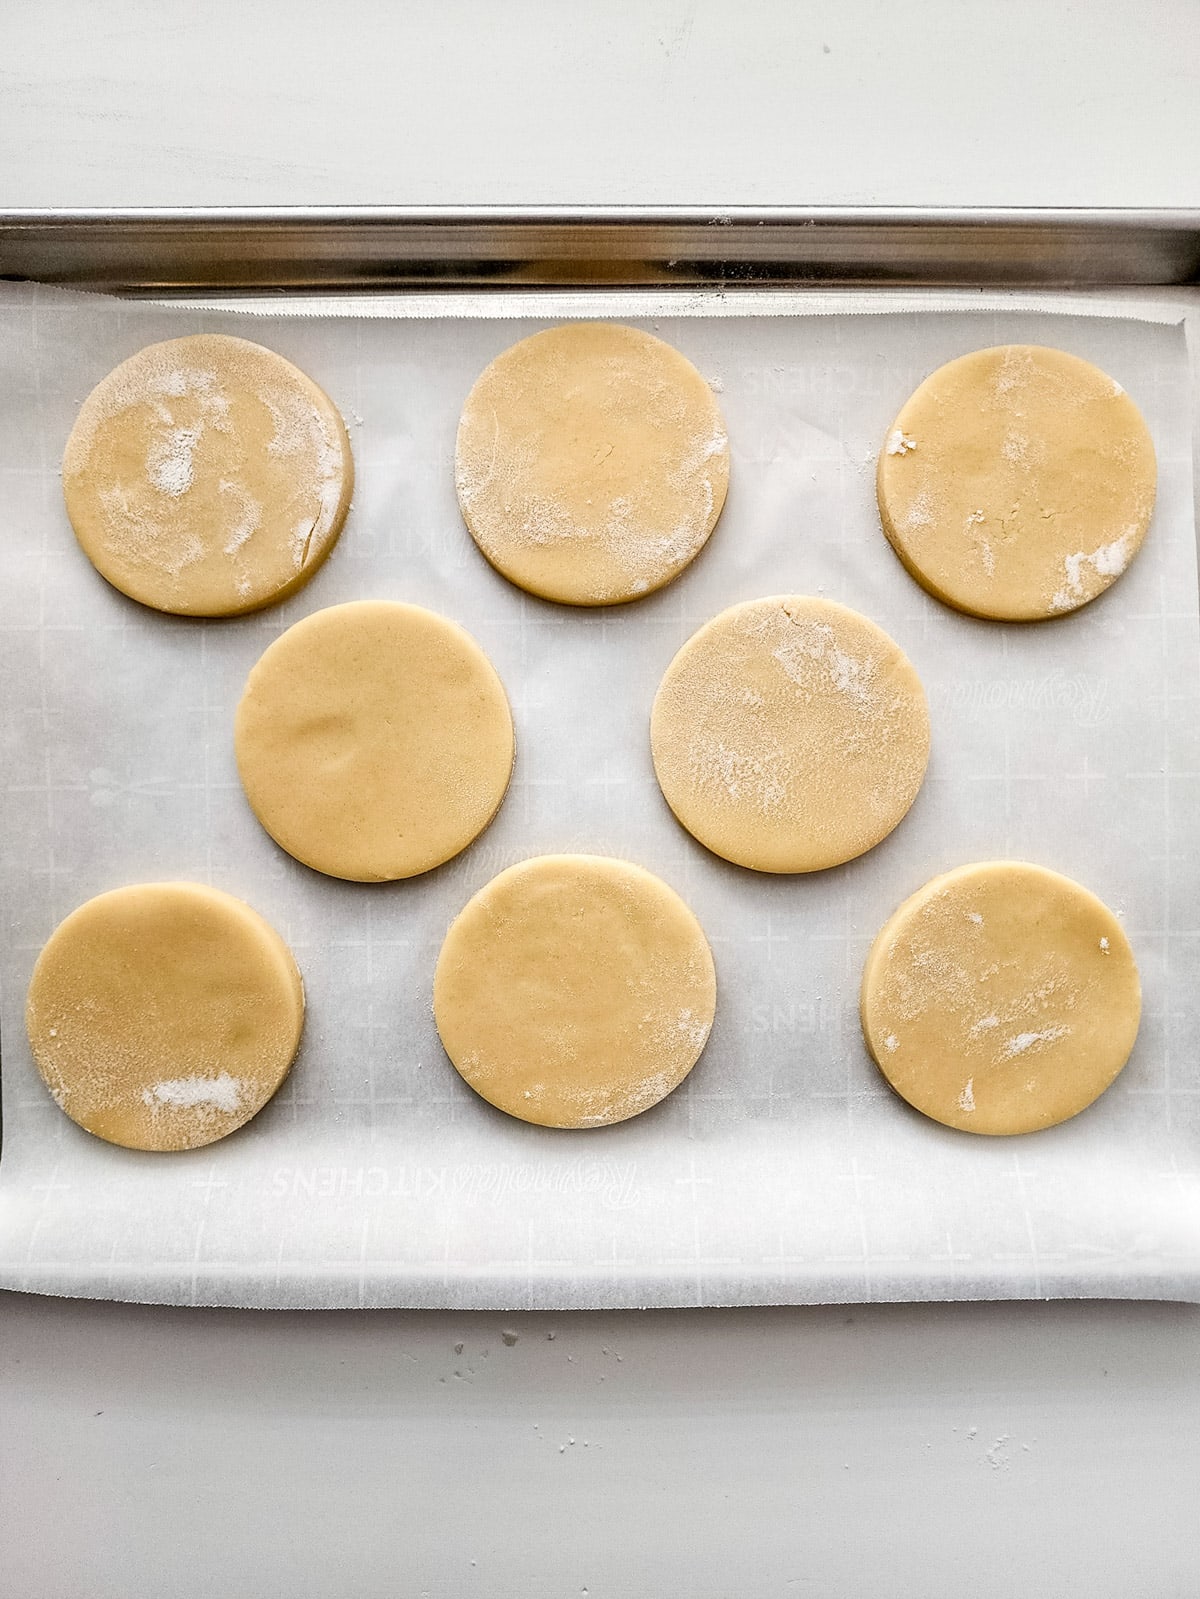 Cookies cut into circles on parchment paper